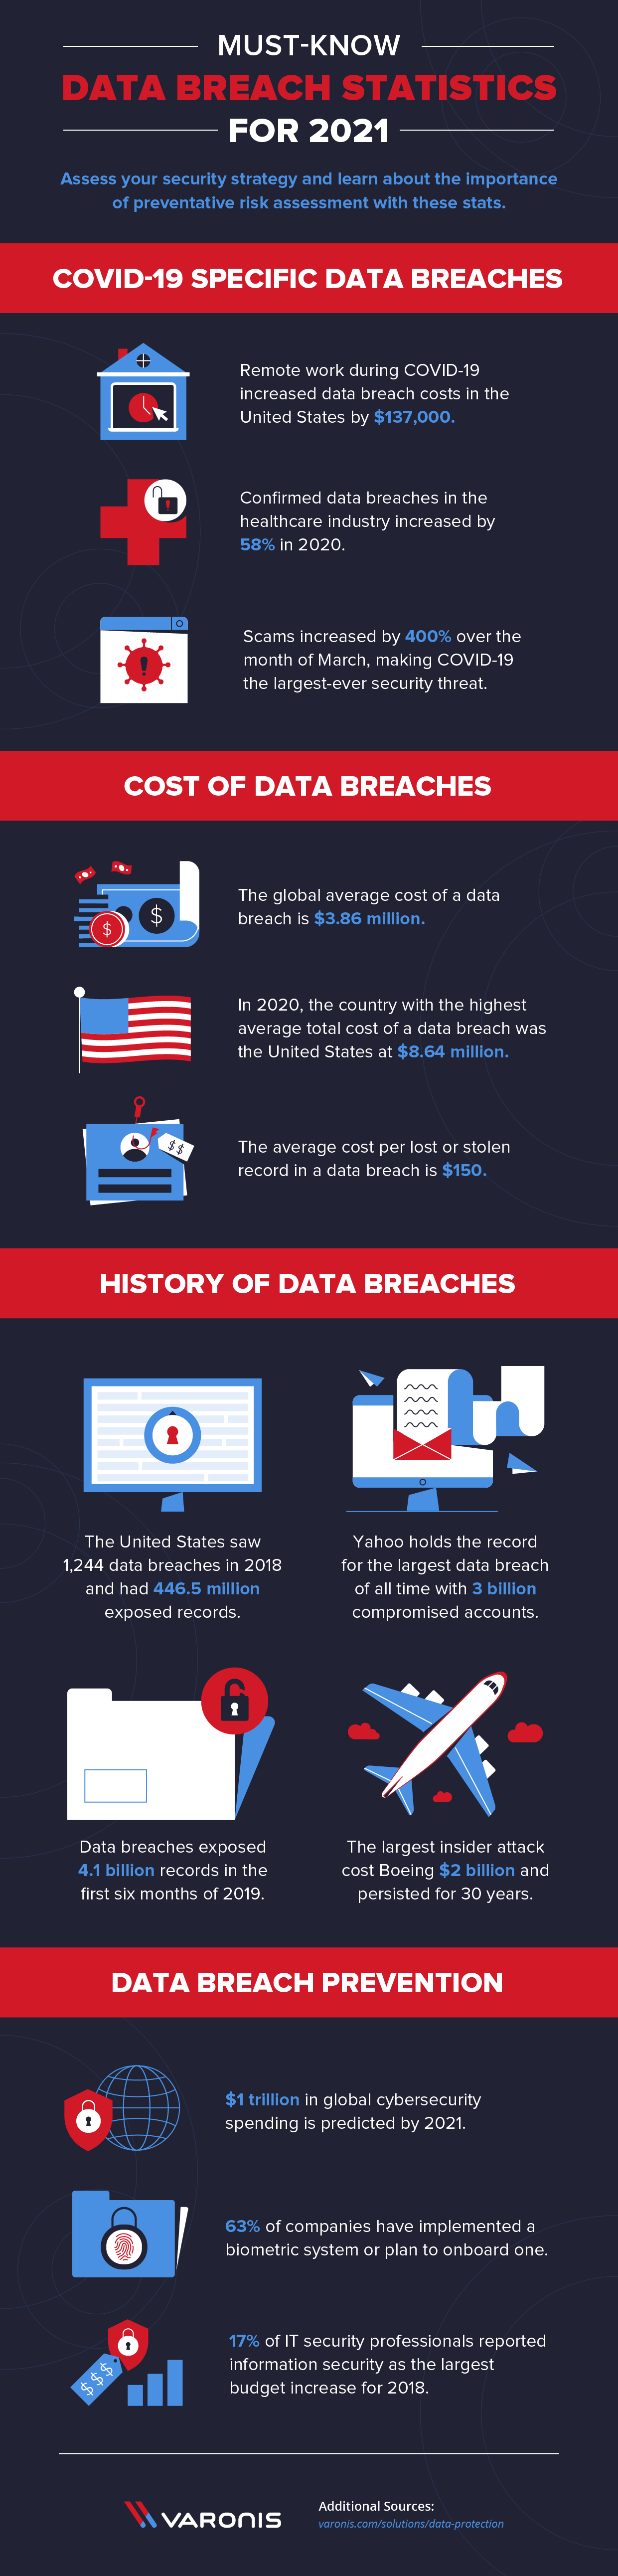 data breach stats 2020 infographic